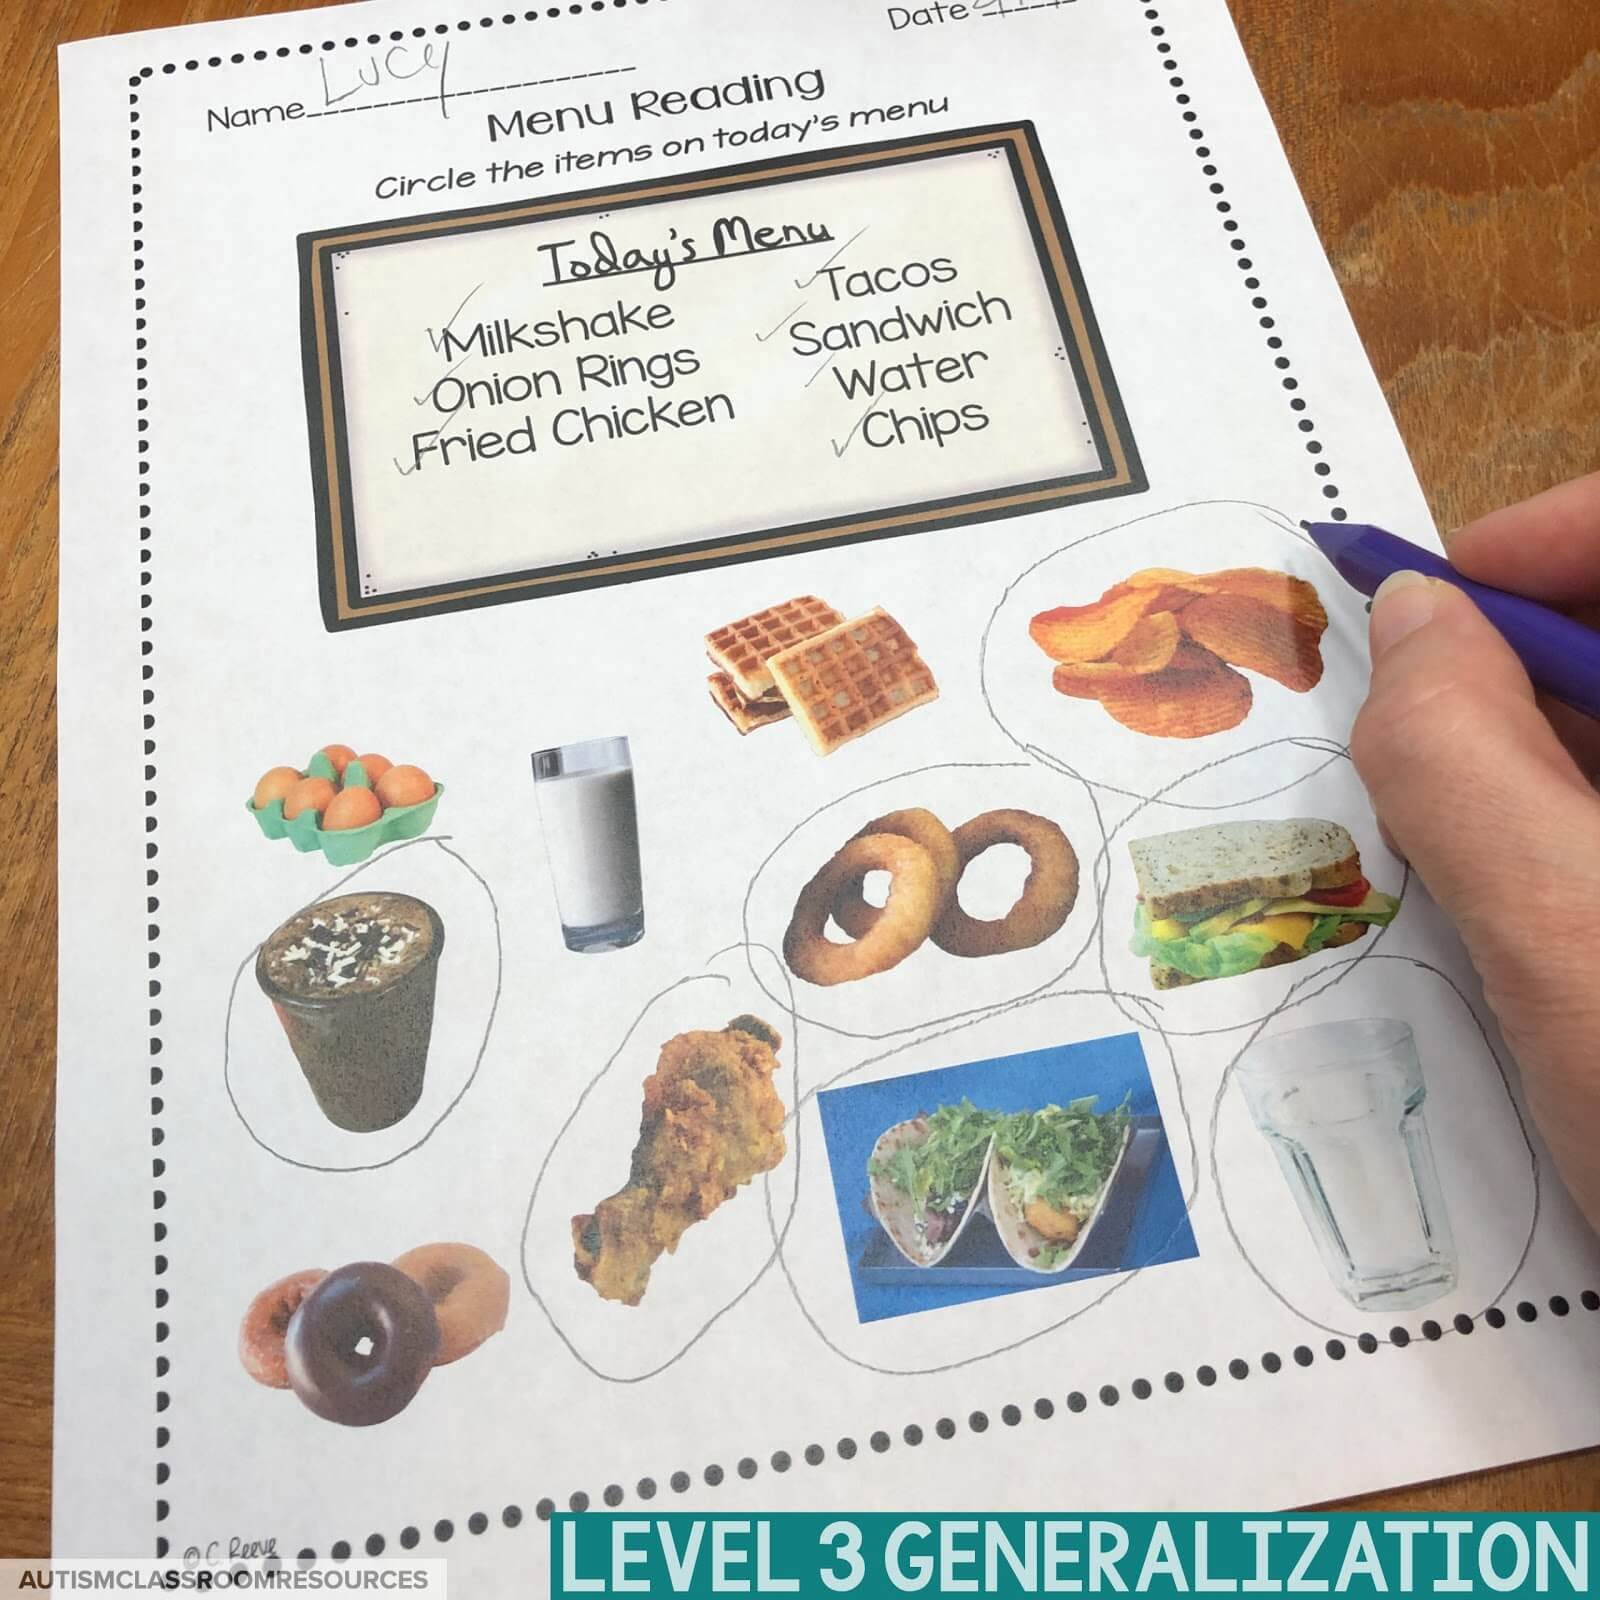 Classroom Tools You Need Leveled Functional Reading Worksheets Autism Classroom Resources